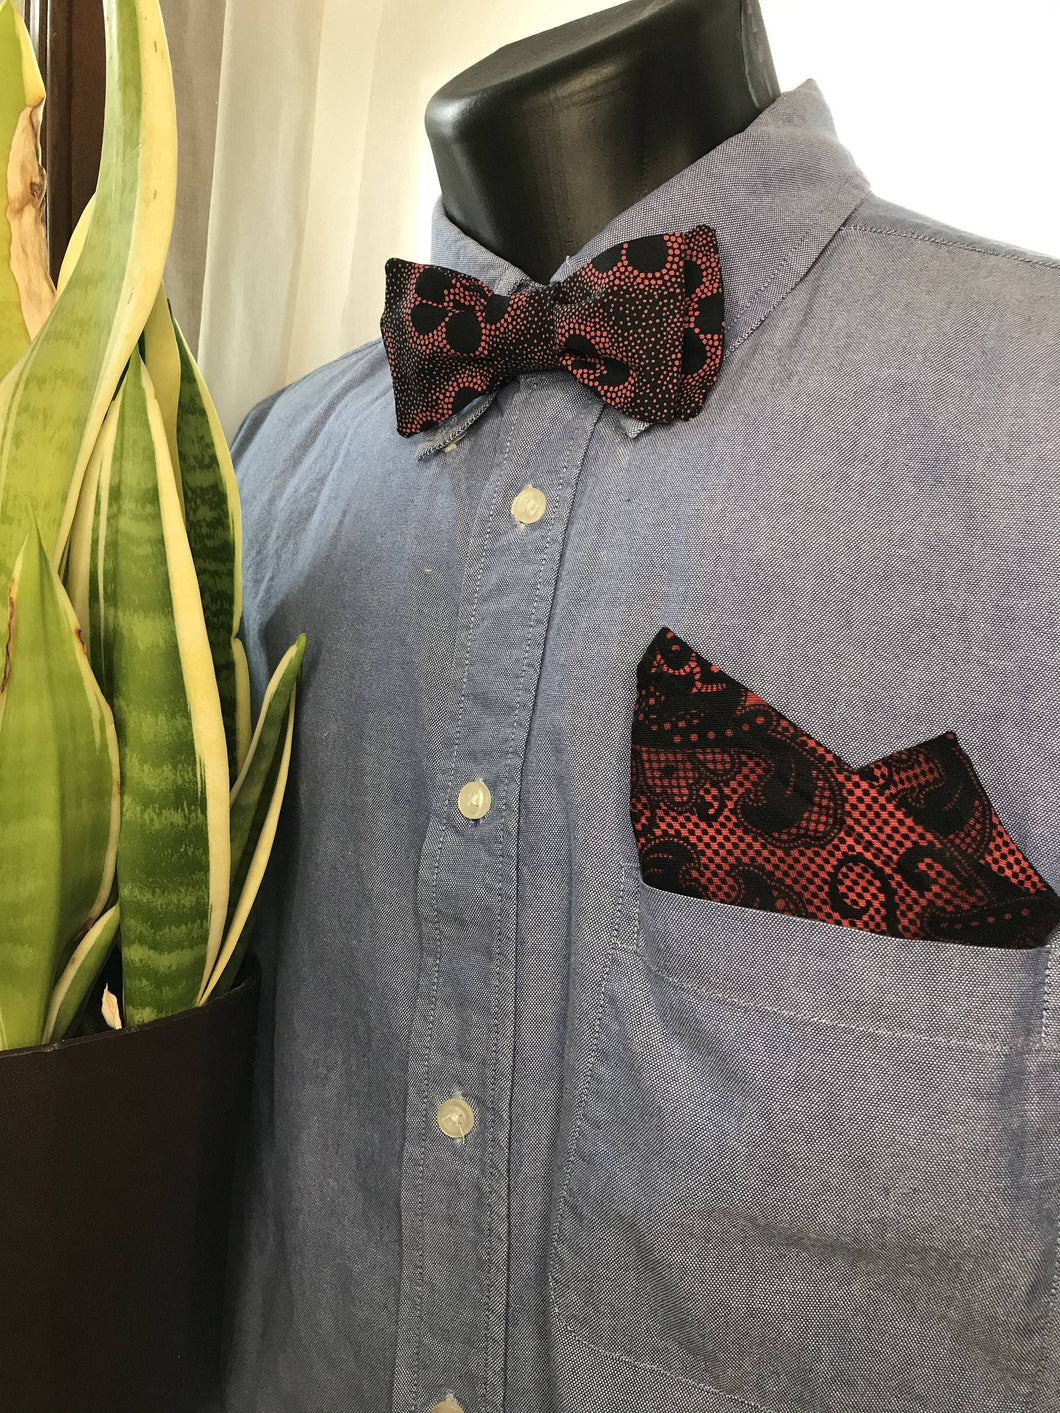 Red Floral Bow Tie and Lace Print Pocket Square